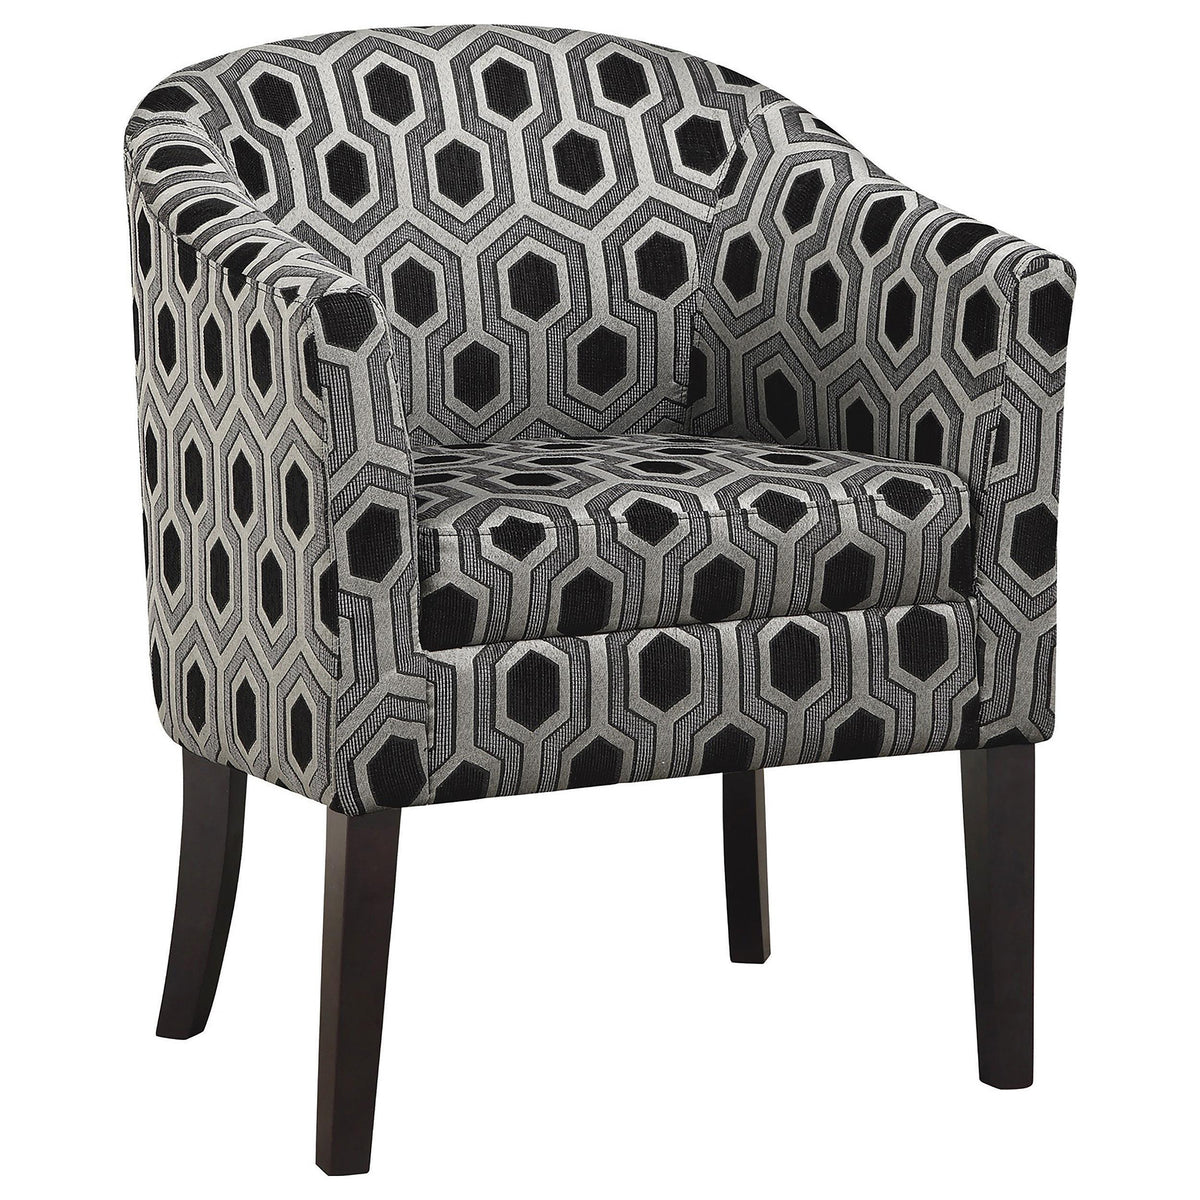 Jansen Hexagon Patterned Accent Chair Grey and Black  Half Price Furniture